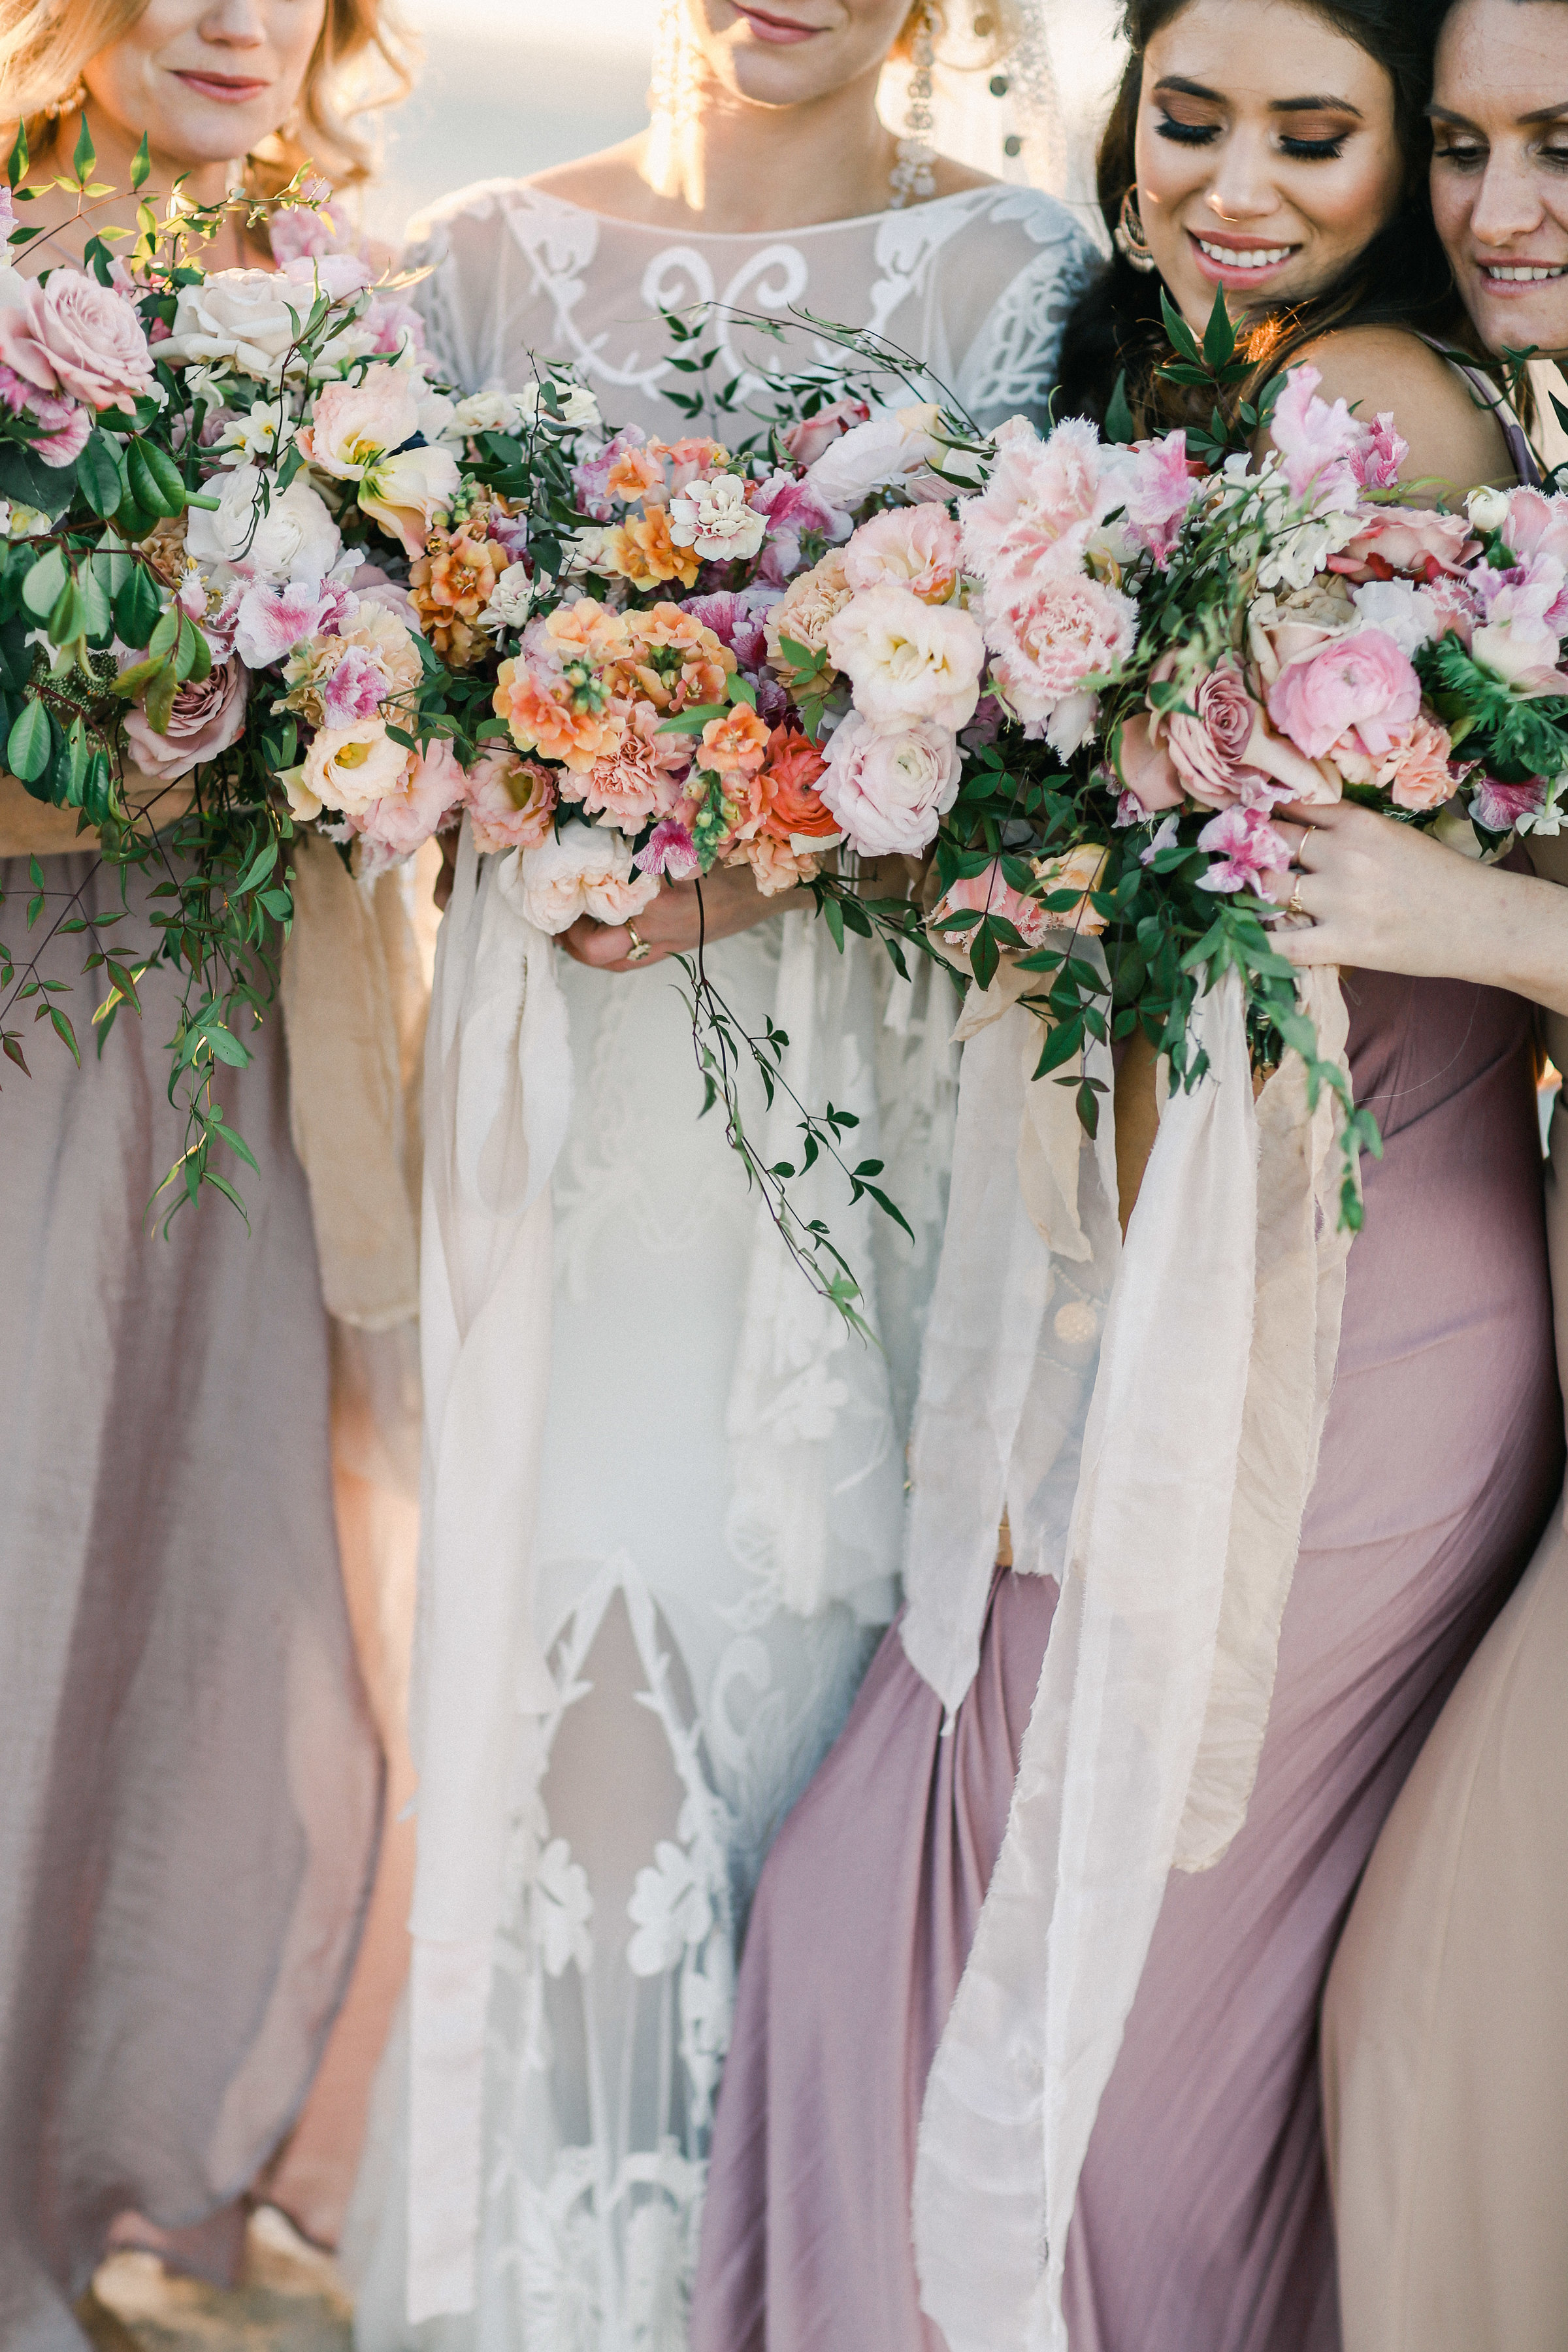 Byron Bay Bride and bridesmaids : pink and taupe dresses : beautiful bouquets .JPG